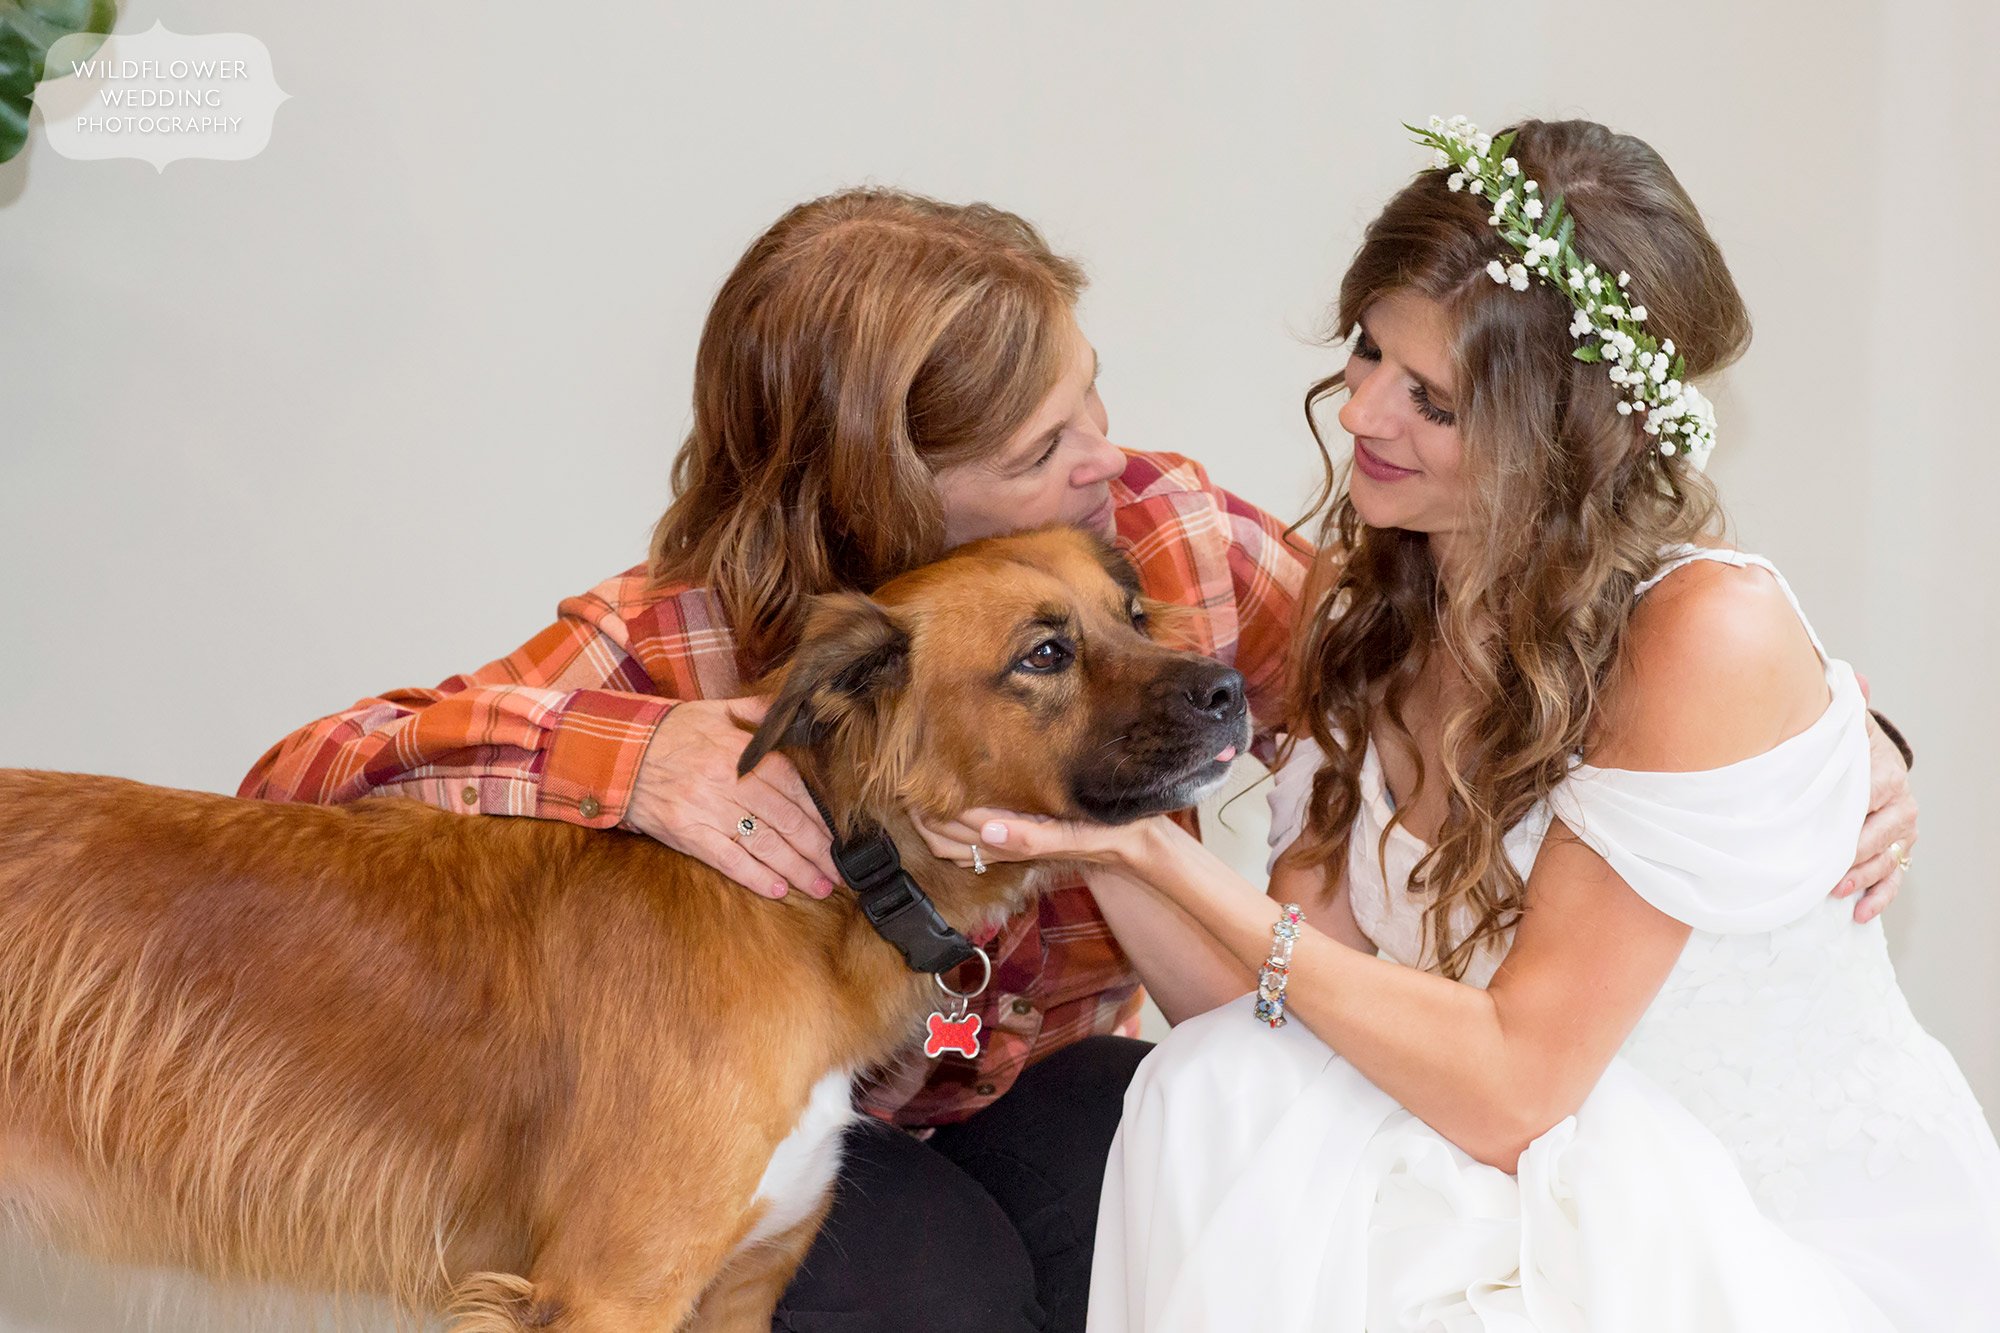 Bride and groom's dog was part of this Little Piney Lodge wedding.